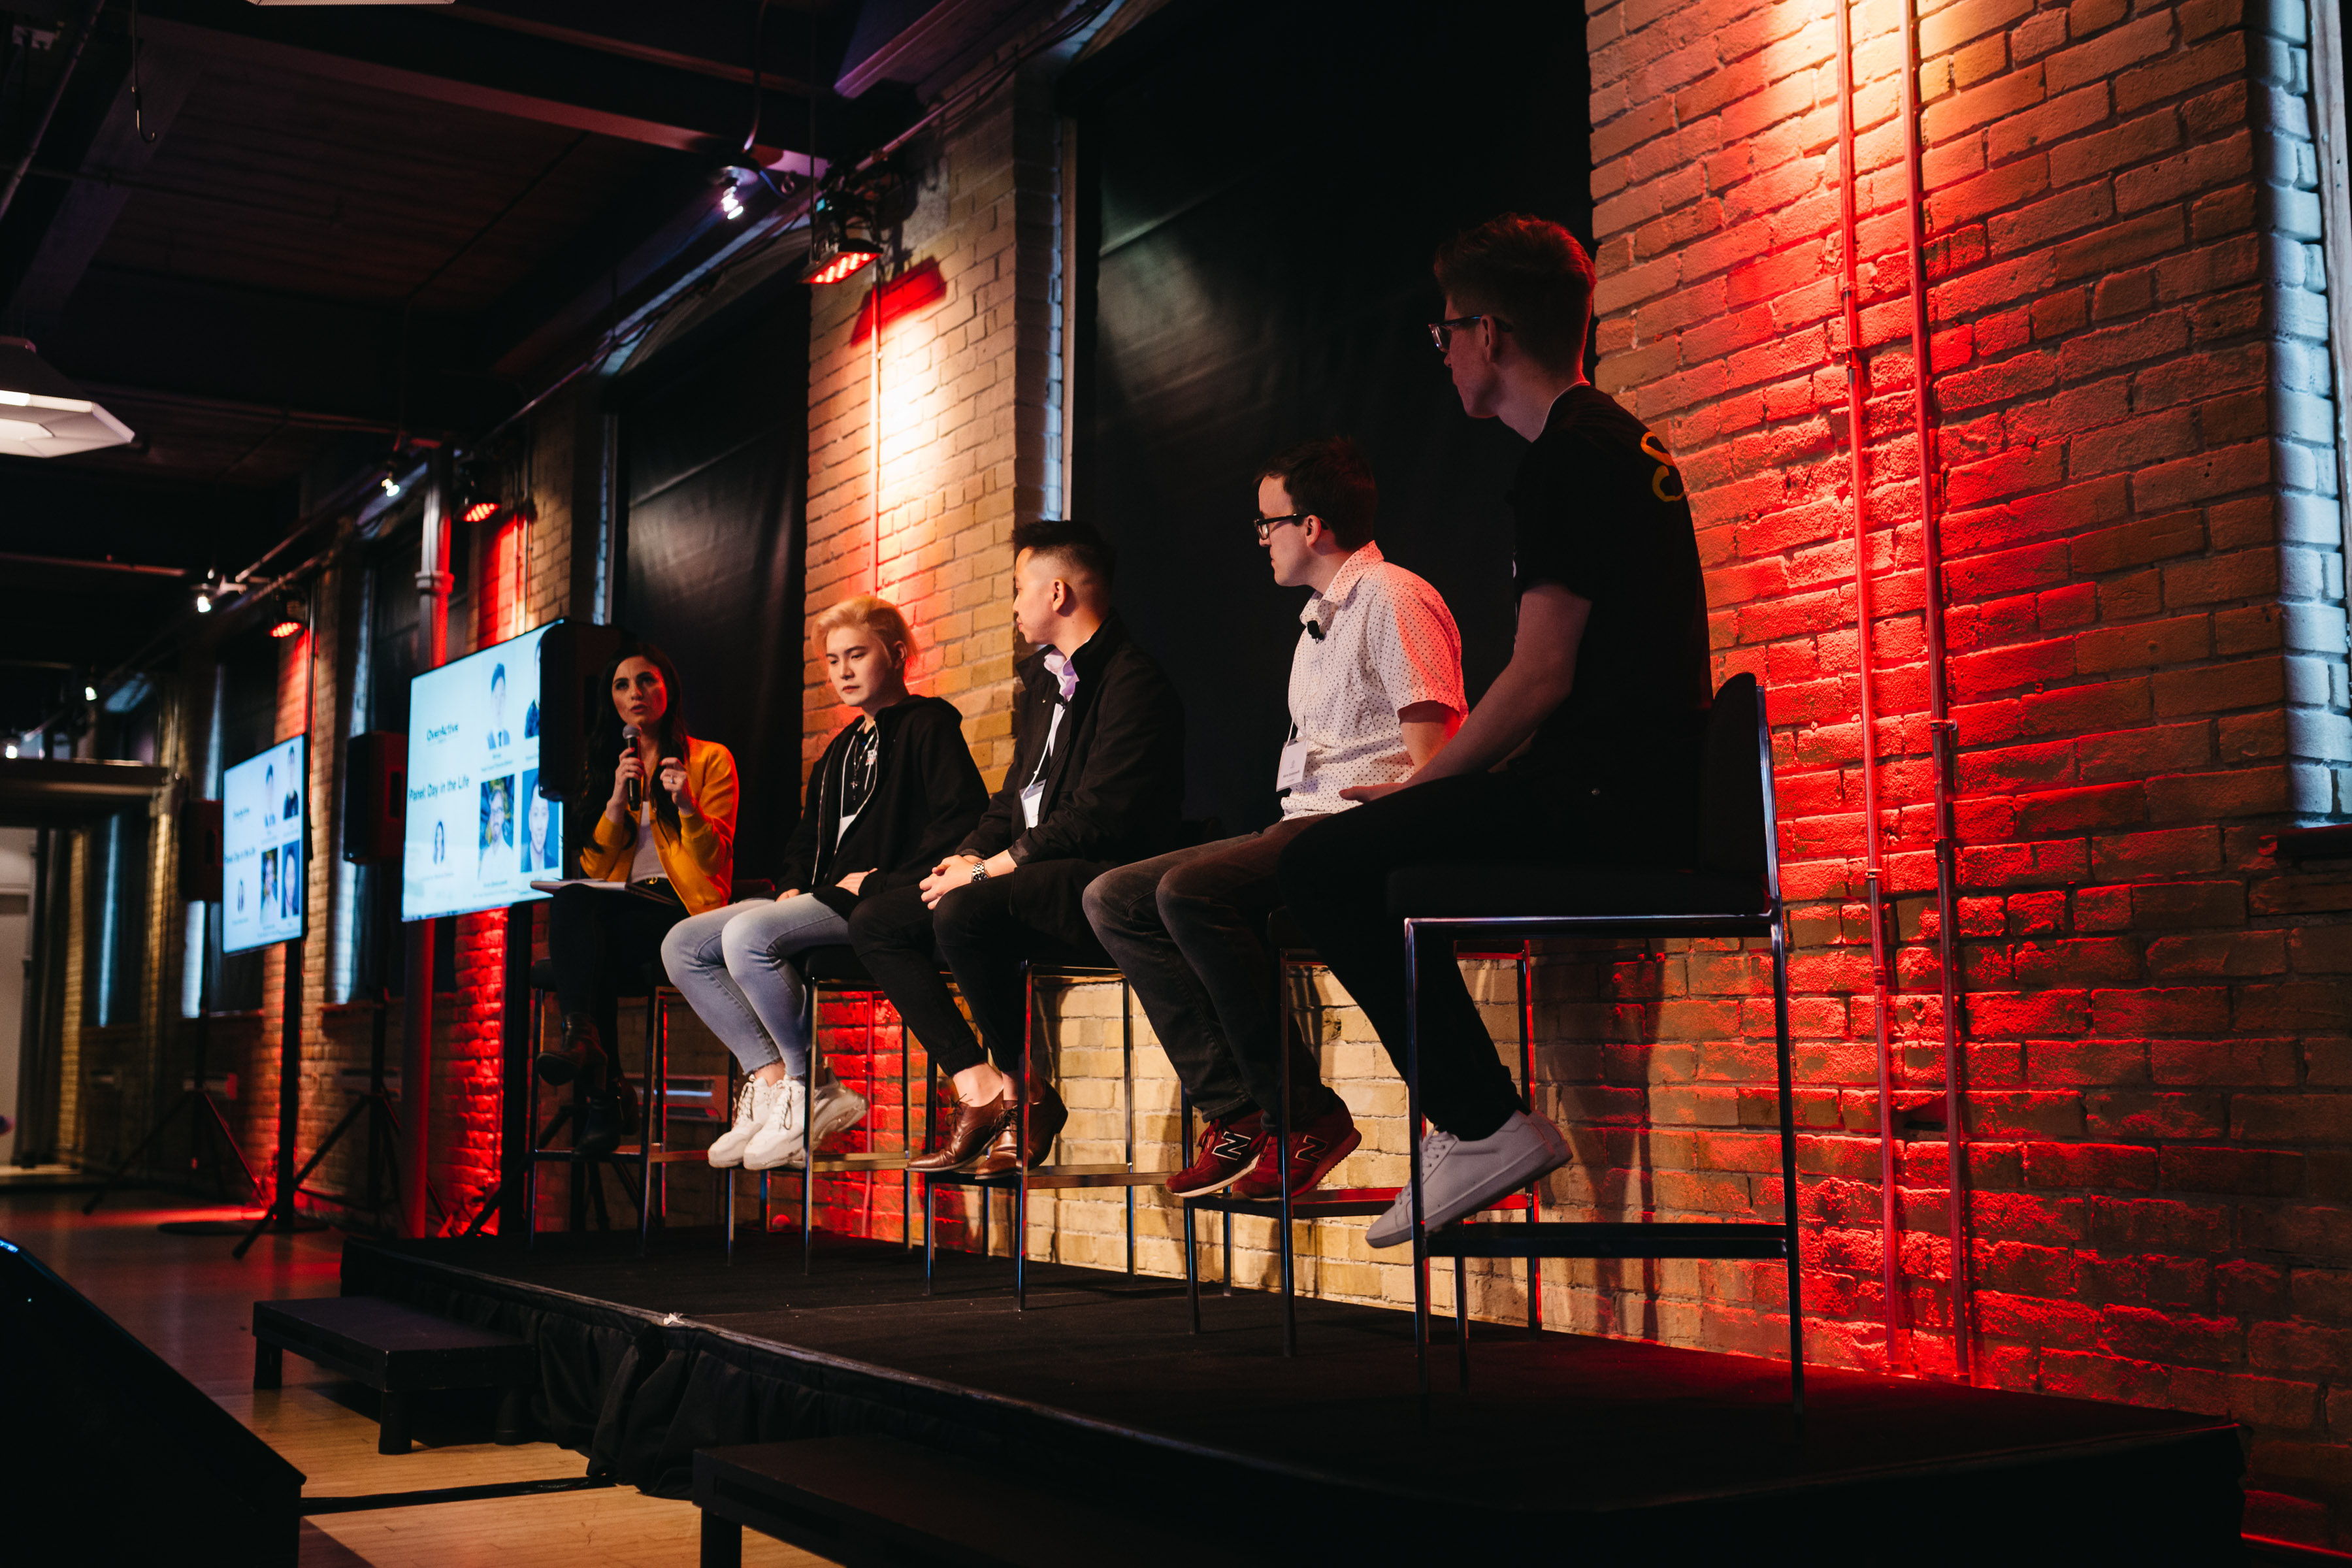 Left to Right: Marissa Roberto, TSN Sportscentre Digital Host; "Bishop," Head Coach, Toronto Defiant; "Loony," Splyce, Call of Duty Player; "KarQ," Overwatch Streamer & Influencer; and Marty Strenczewilk, SVP, Team Operations at OAM & Co-founder of Splyce. [photo credit: Adam Deunk]